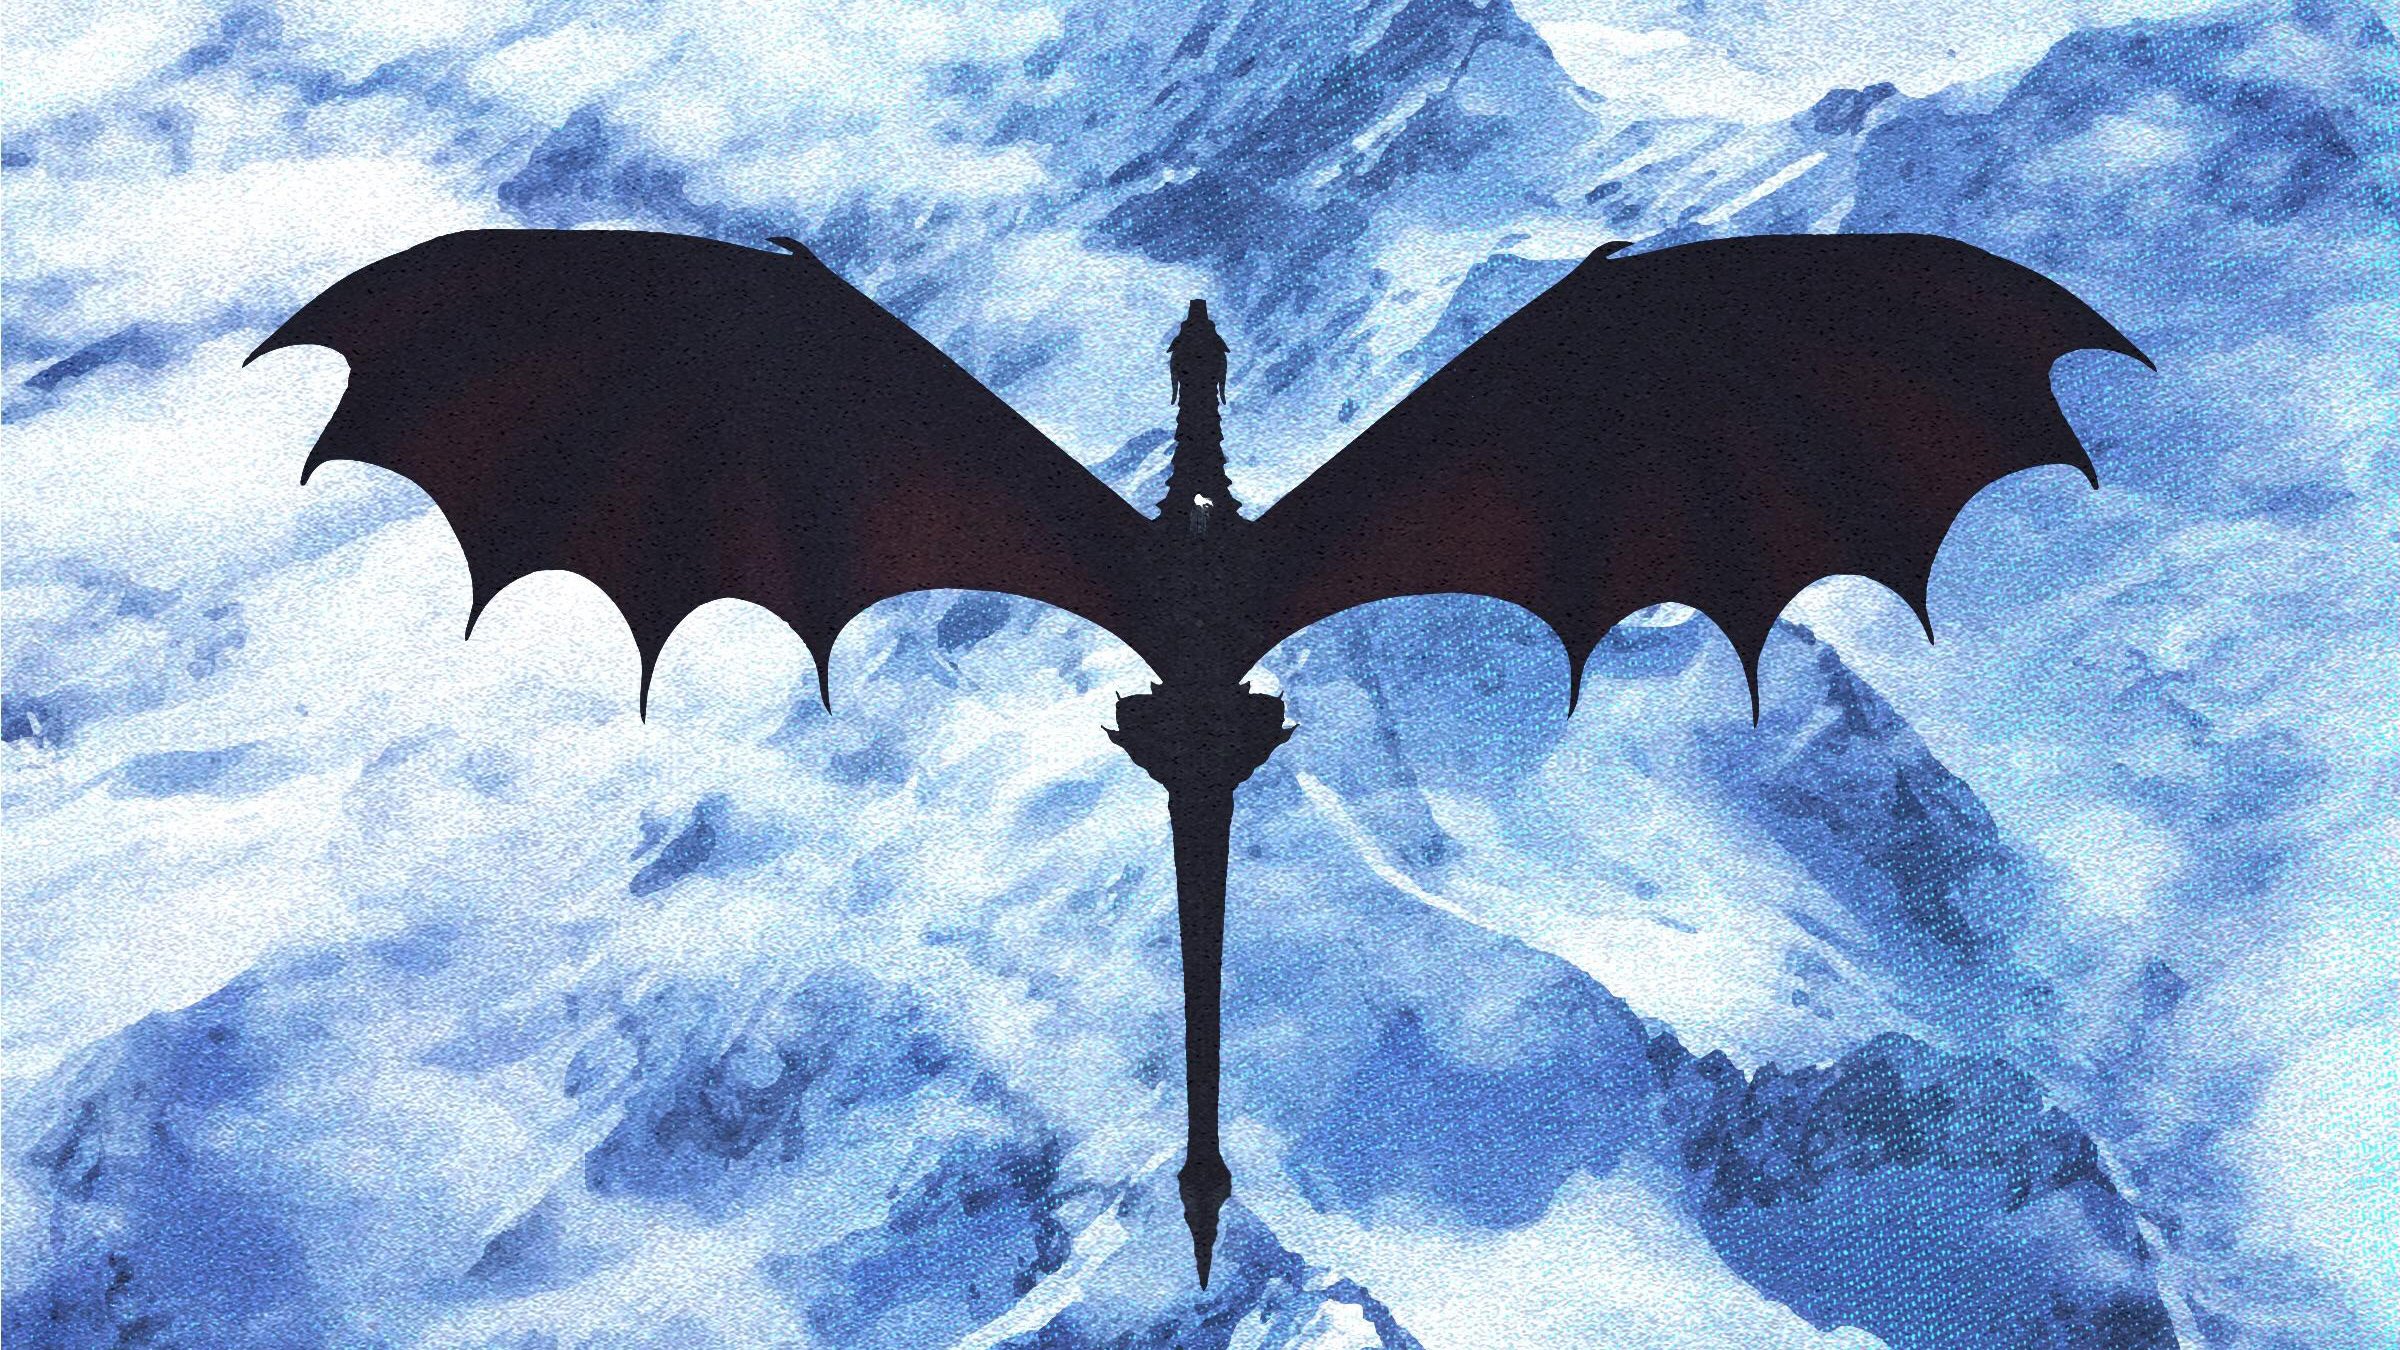 Game Of Thrones Dragon Artwork, HD Tv Shows, 4k Wallpaper, Image, Background, Photo and Picture